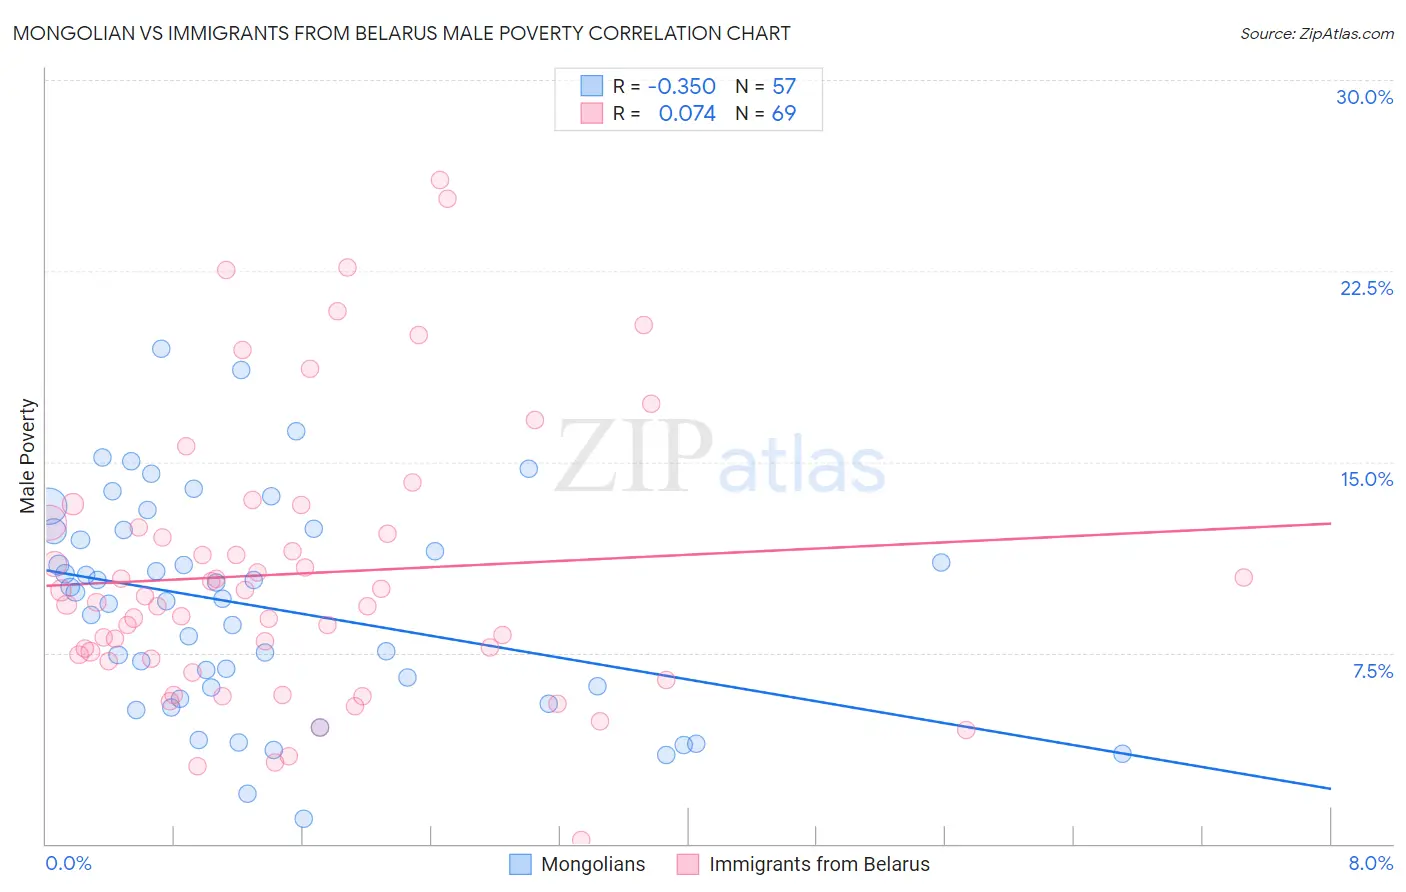 Mongolian vs Immigrants from Belarus Male Poverty